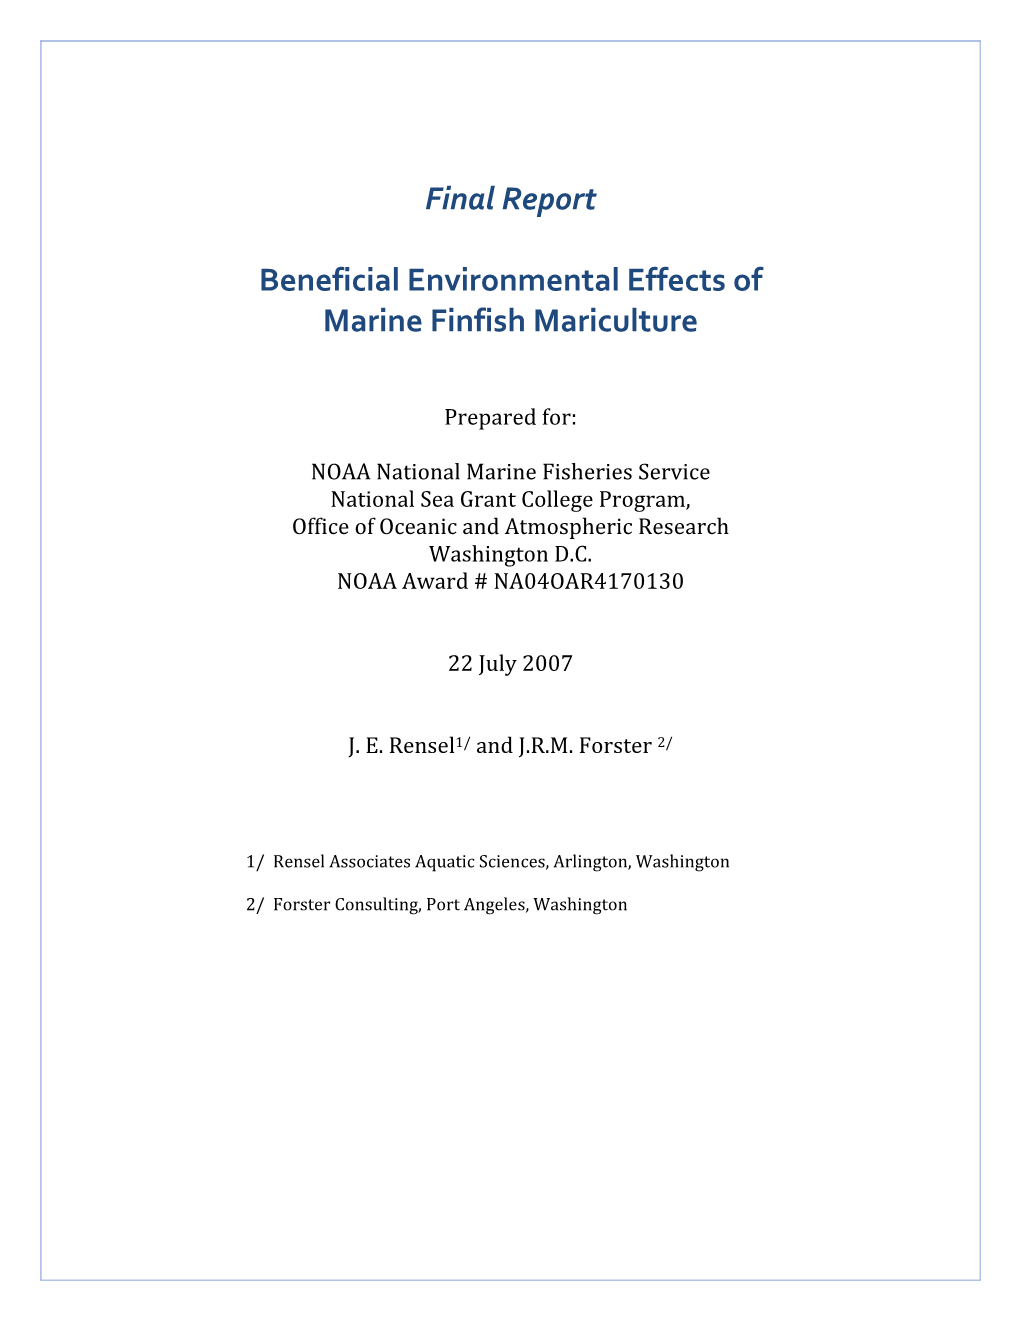 Final Report Beneficial Environmental Effects of Marine Finfish Mariculture